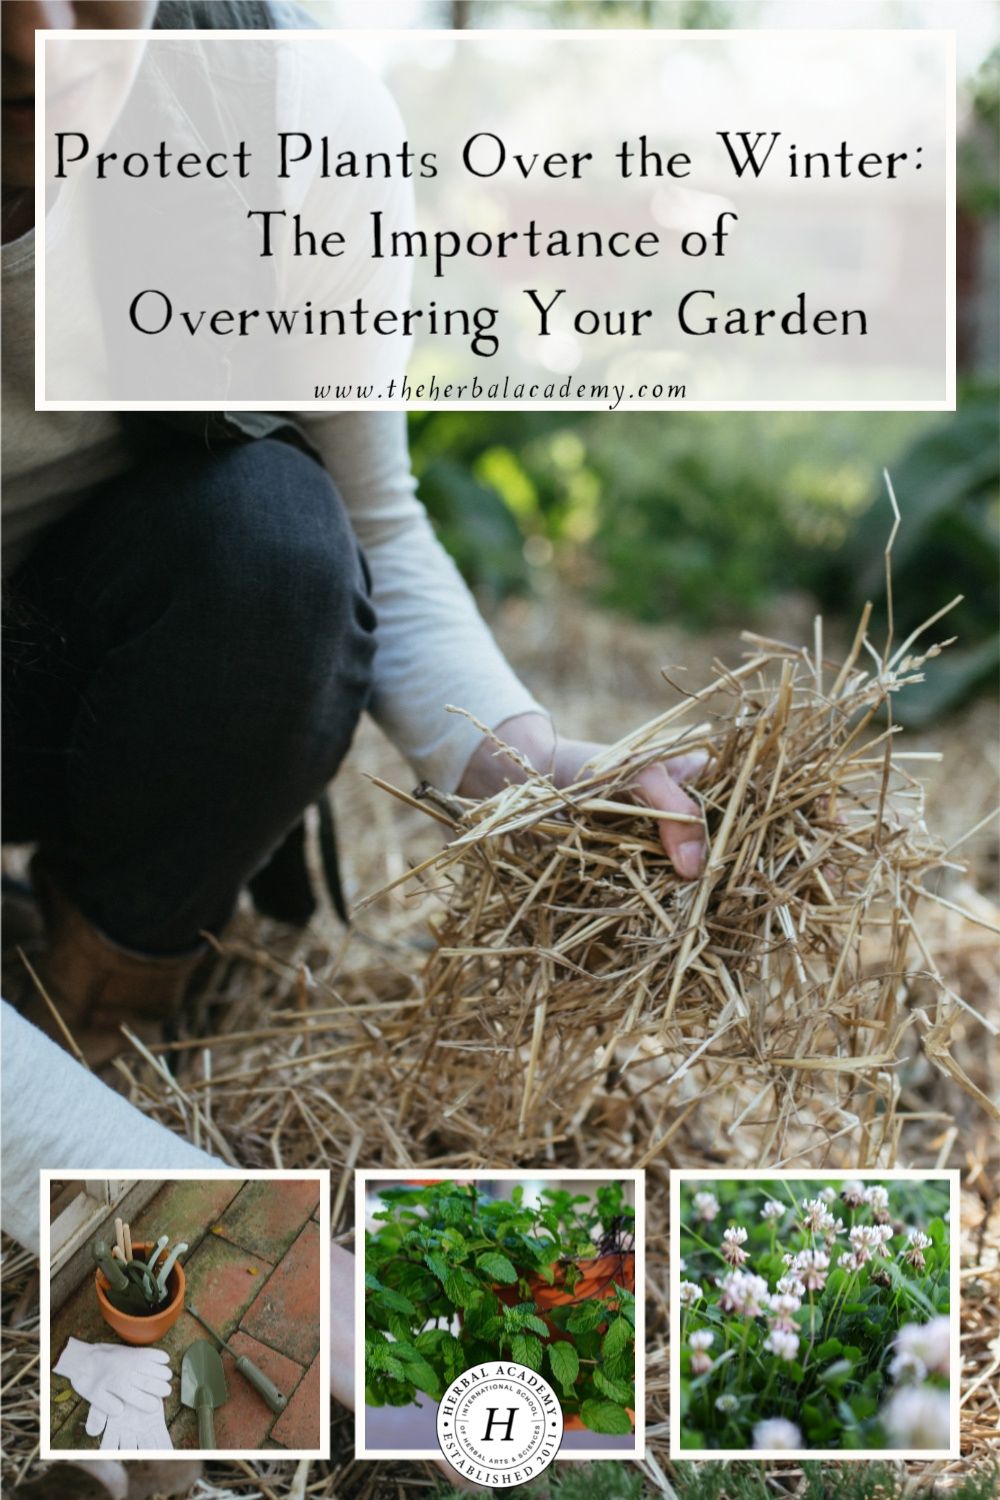 Protect Plants Over the Winter: The Importance of Overwintering Your Garden | Herbal Academy | Using overwintering strategies to prepare your garden for the winter will go a long way in protecting your plants and garden soil.